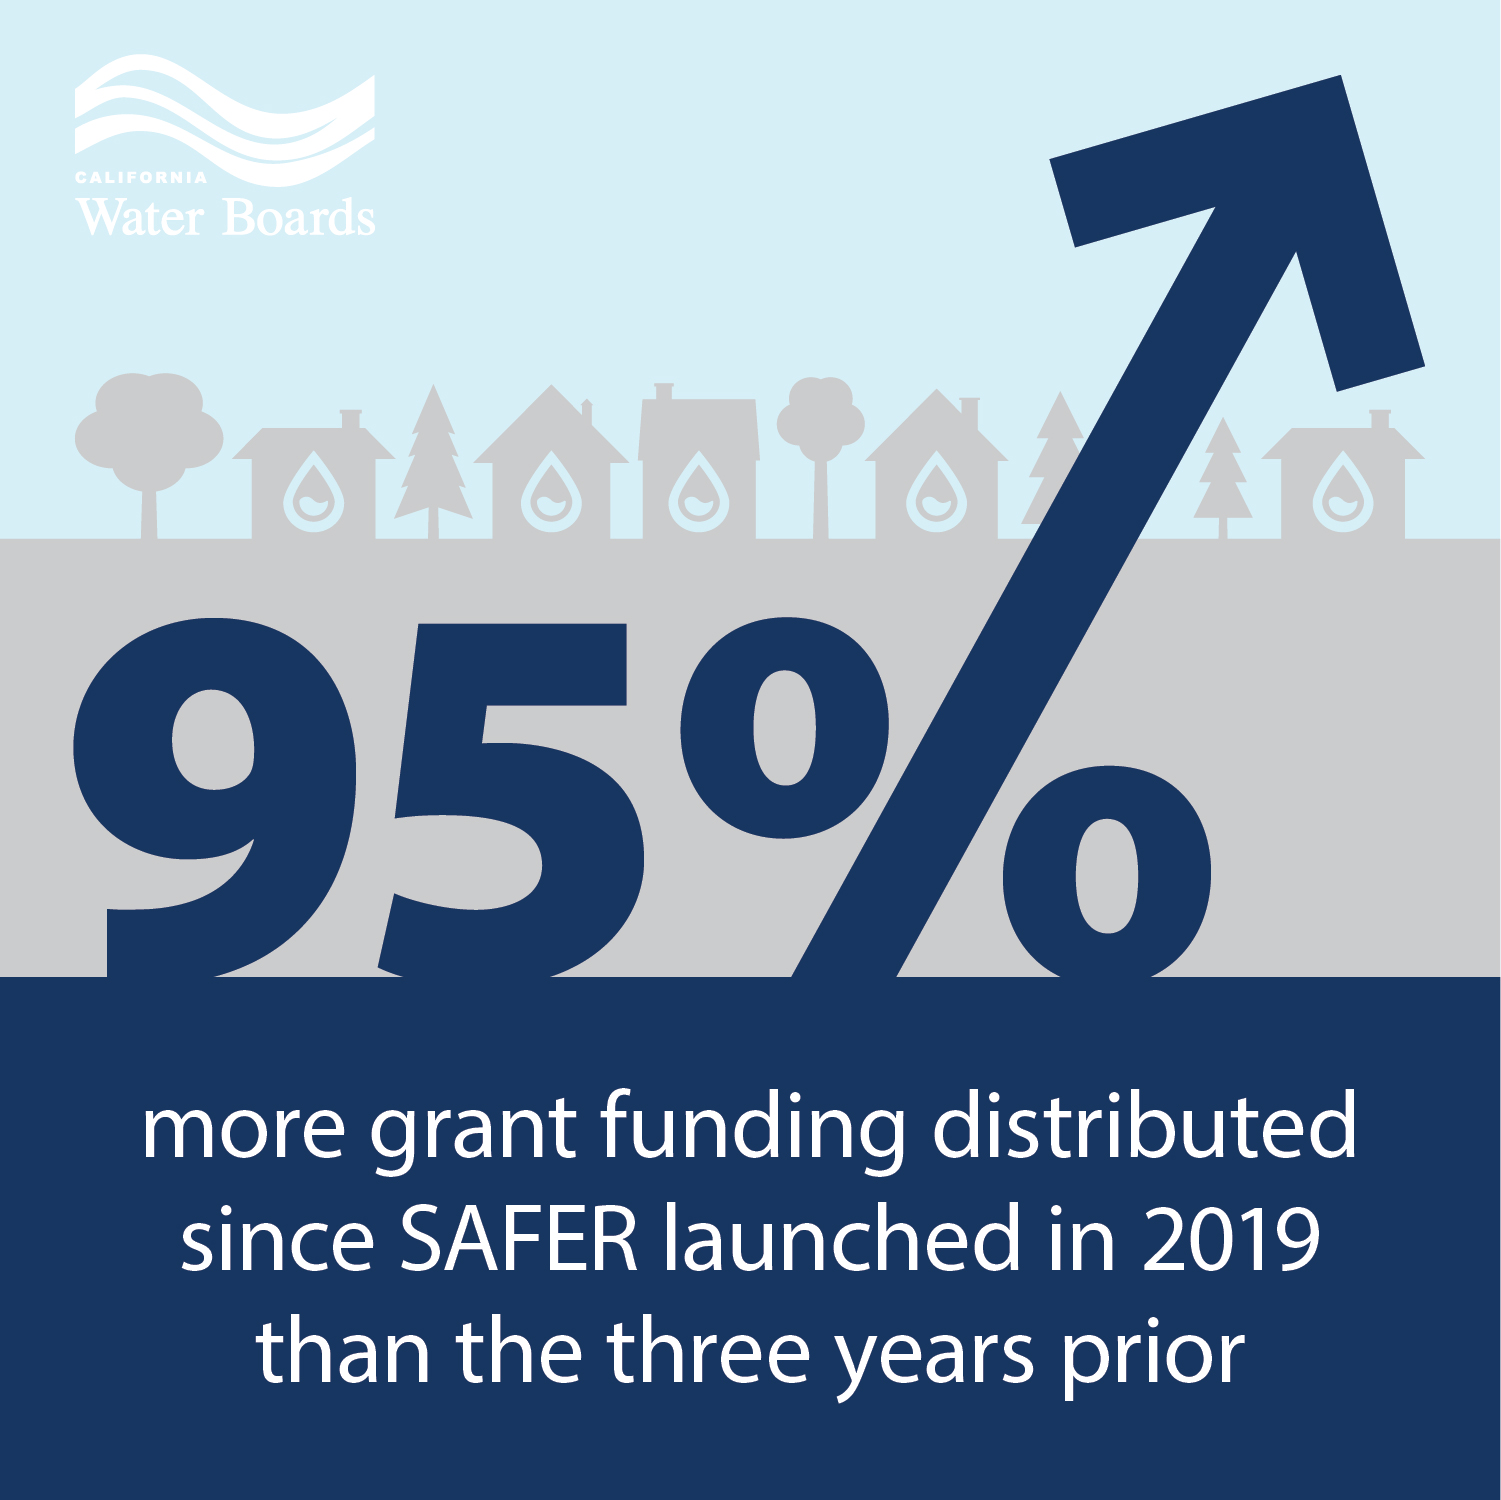 95 percent more grant funding distributed since SAFER launched in 2019 than the three years prior